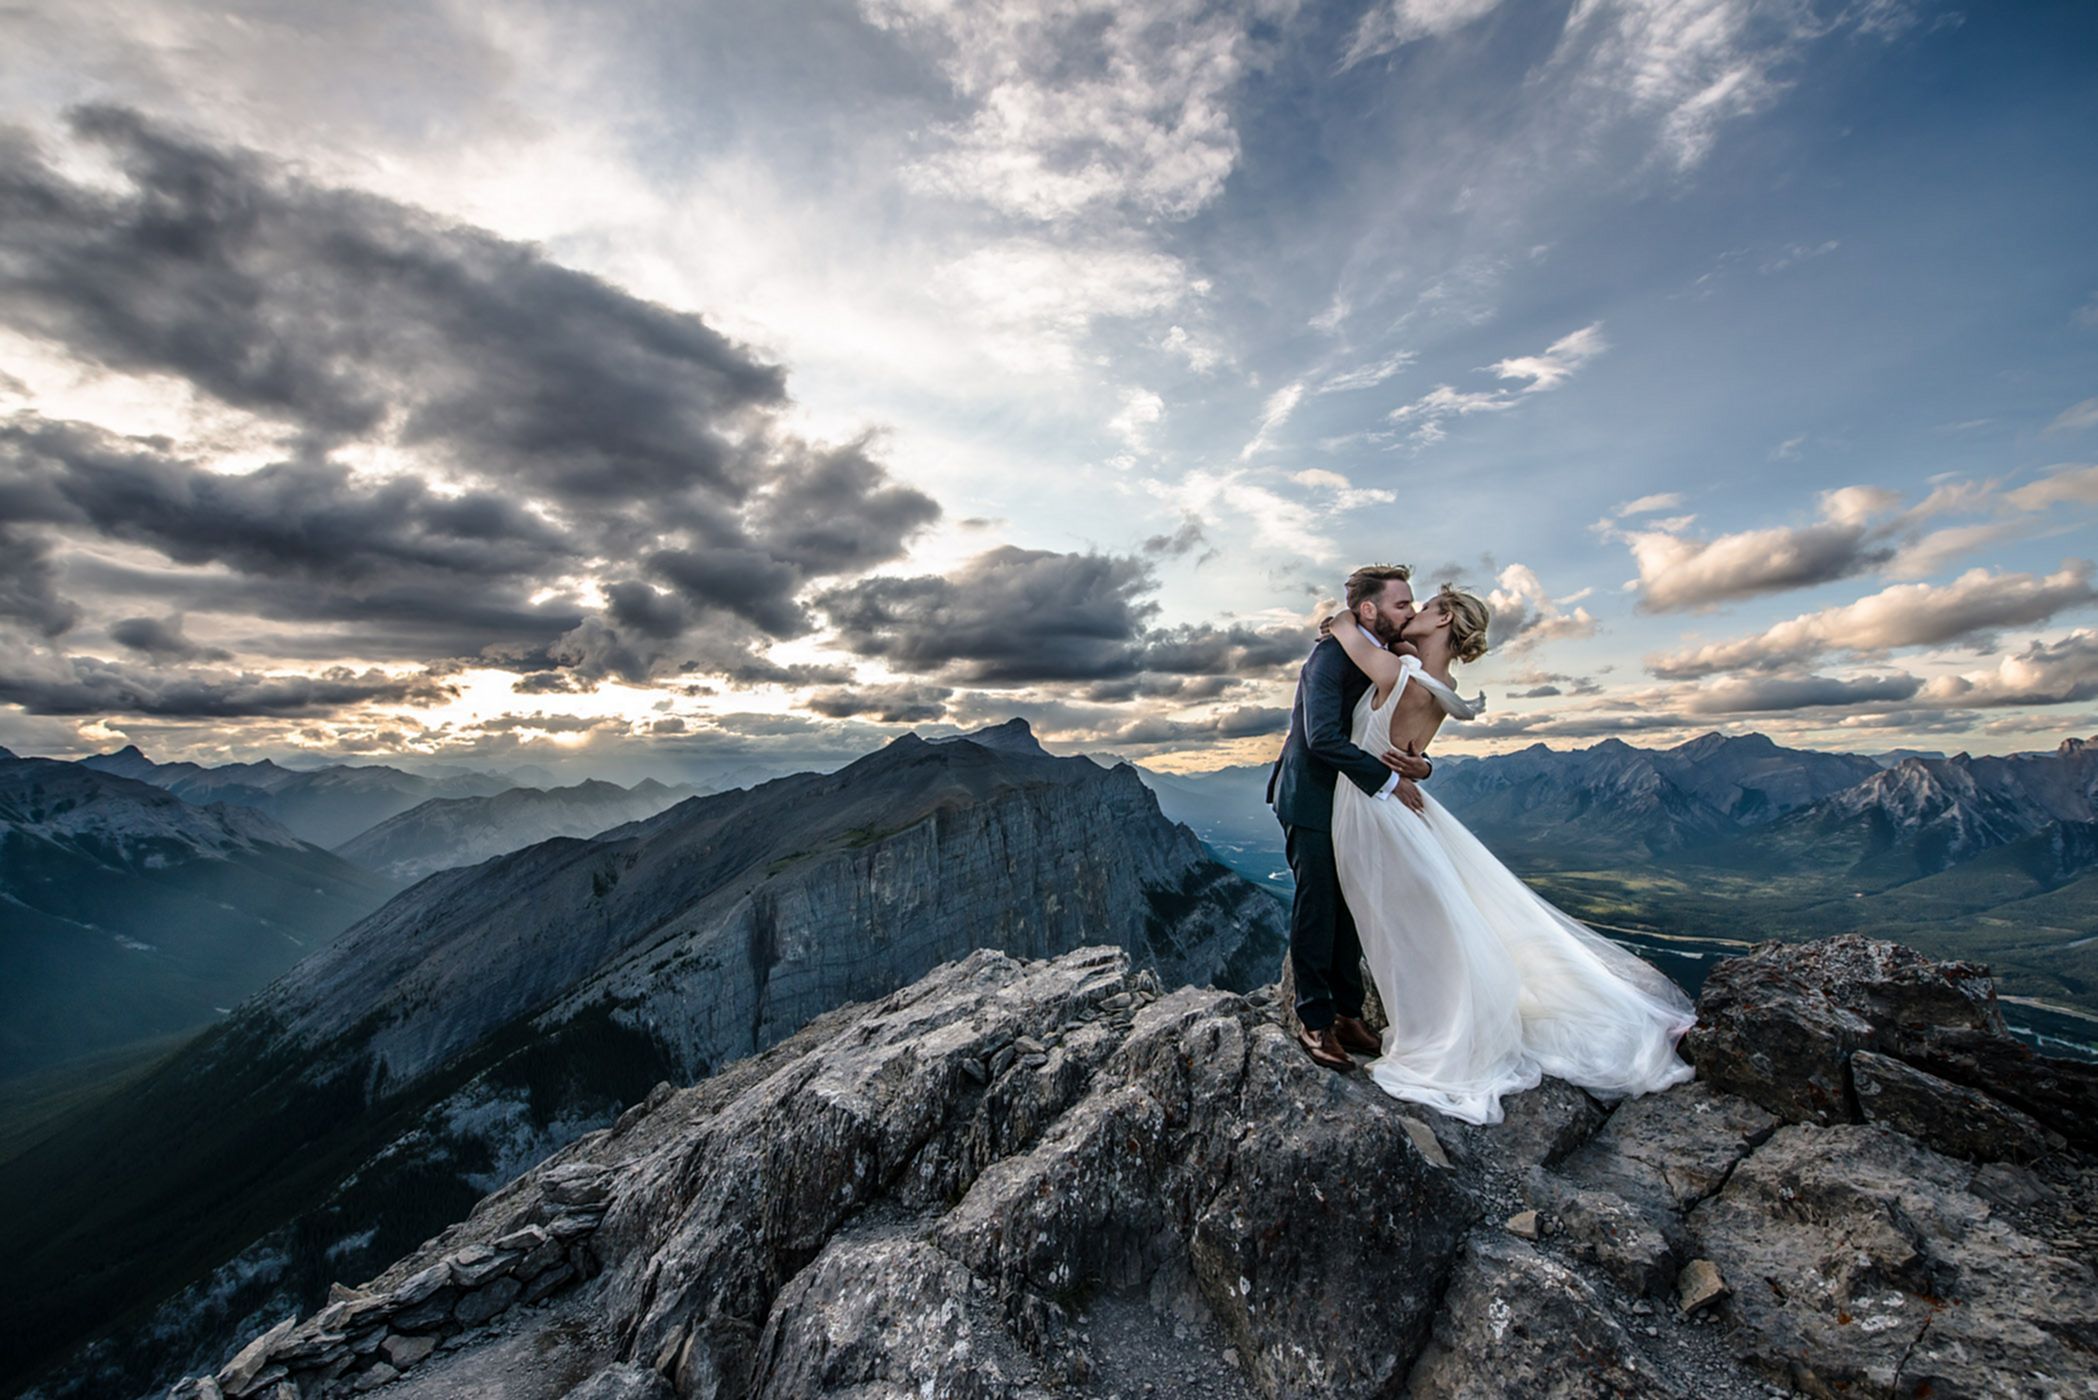 What Are Things to Know Looking for Wedding Photography Calgary?